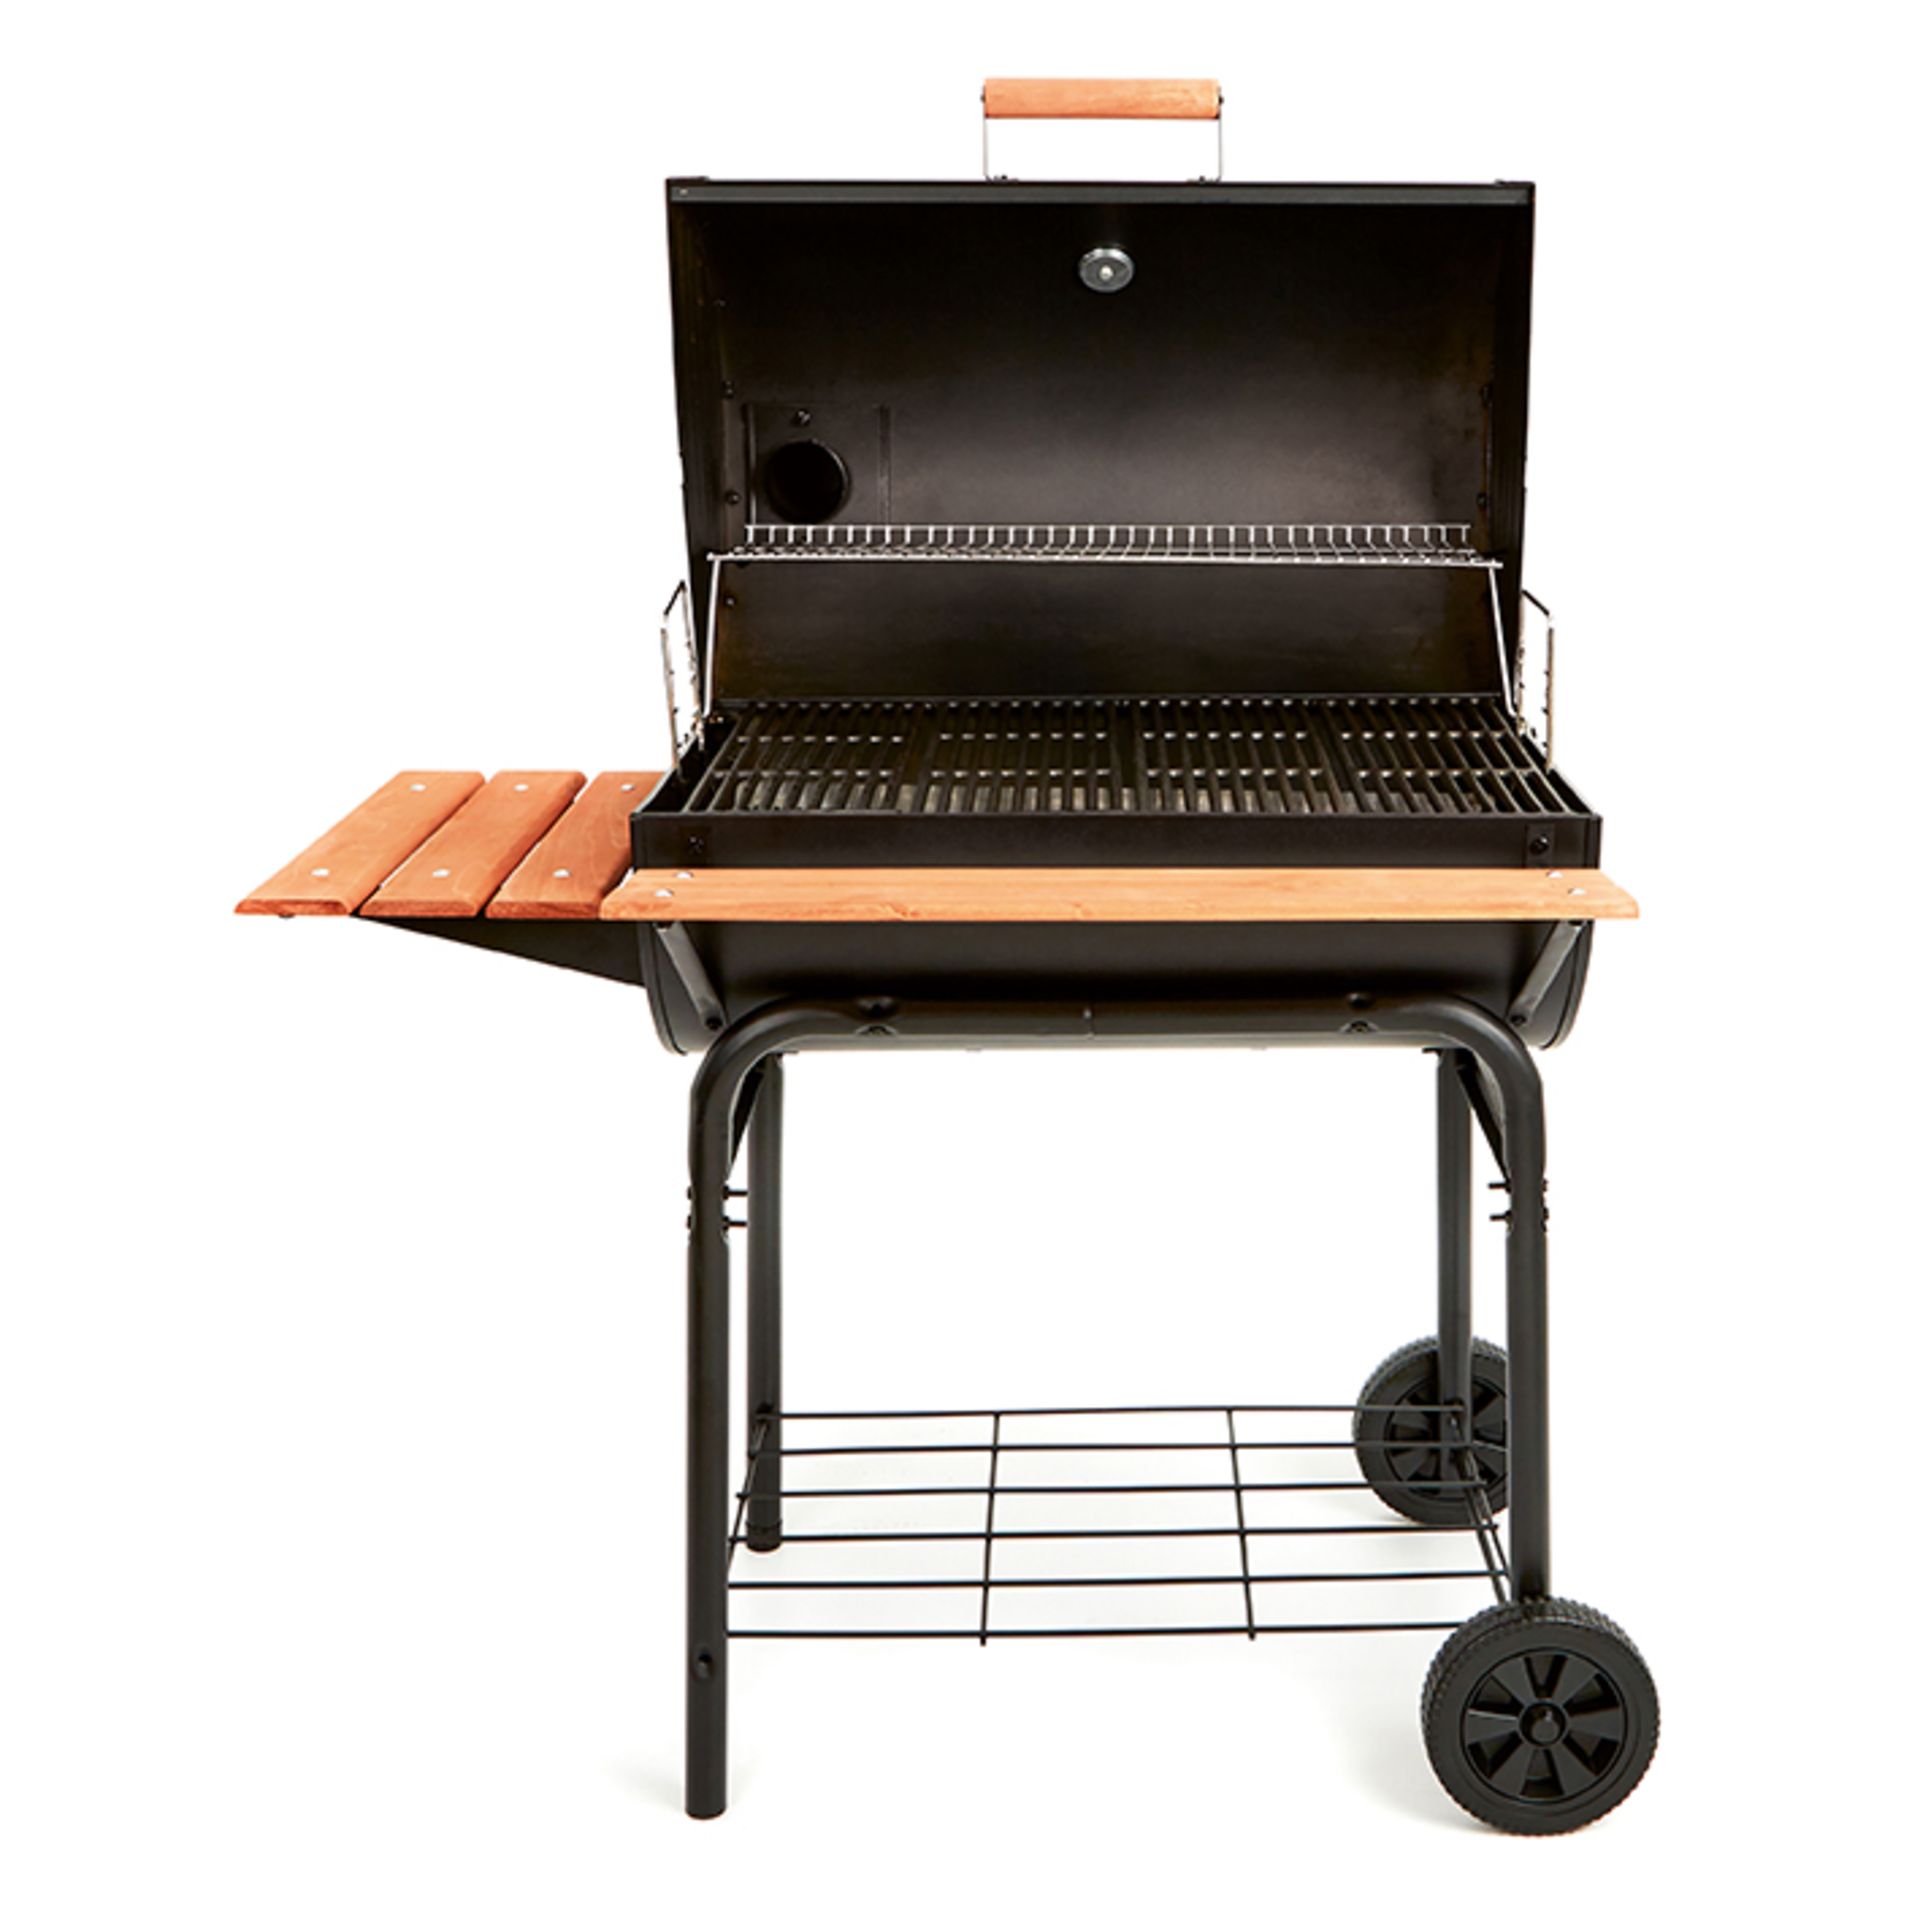 BRAND NEW* CHARCOAL GRILL PRO BLACK PATIO OUTDOOR GARDEN XL COOKING DELUXE AIR NEW CHAR BBQ - Image 4 of 8